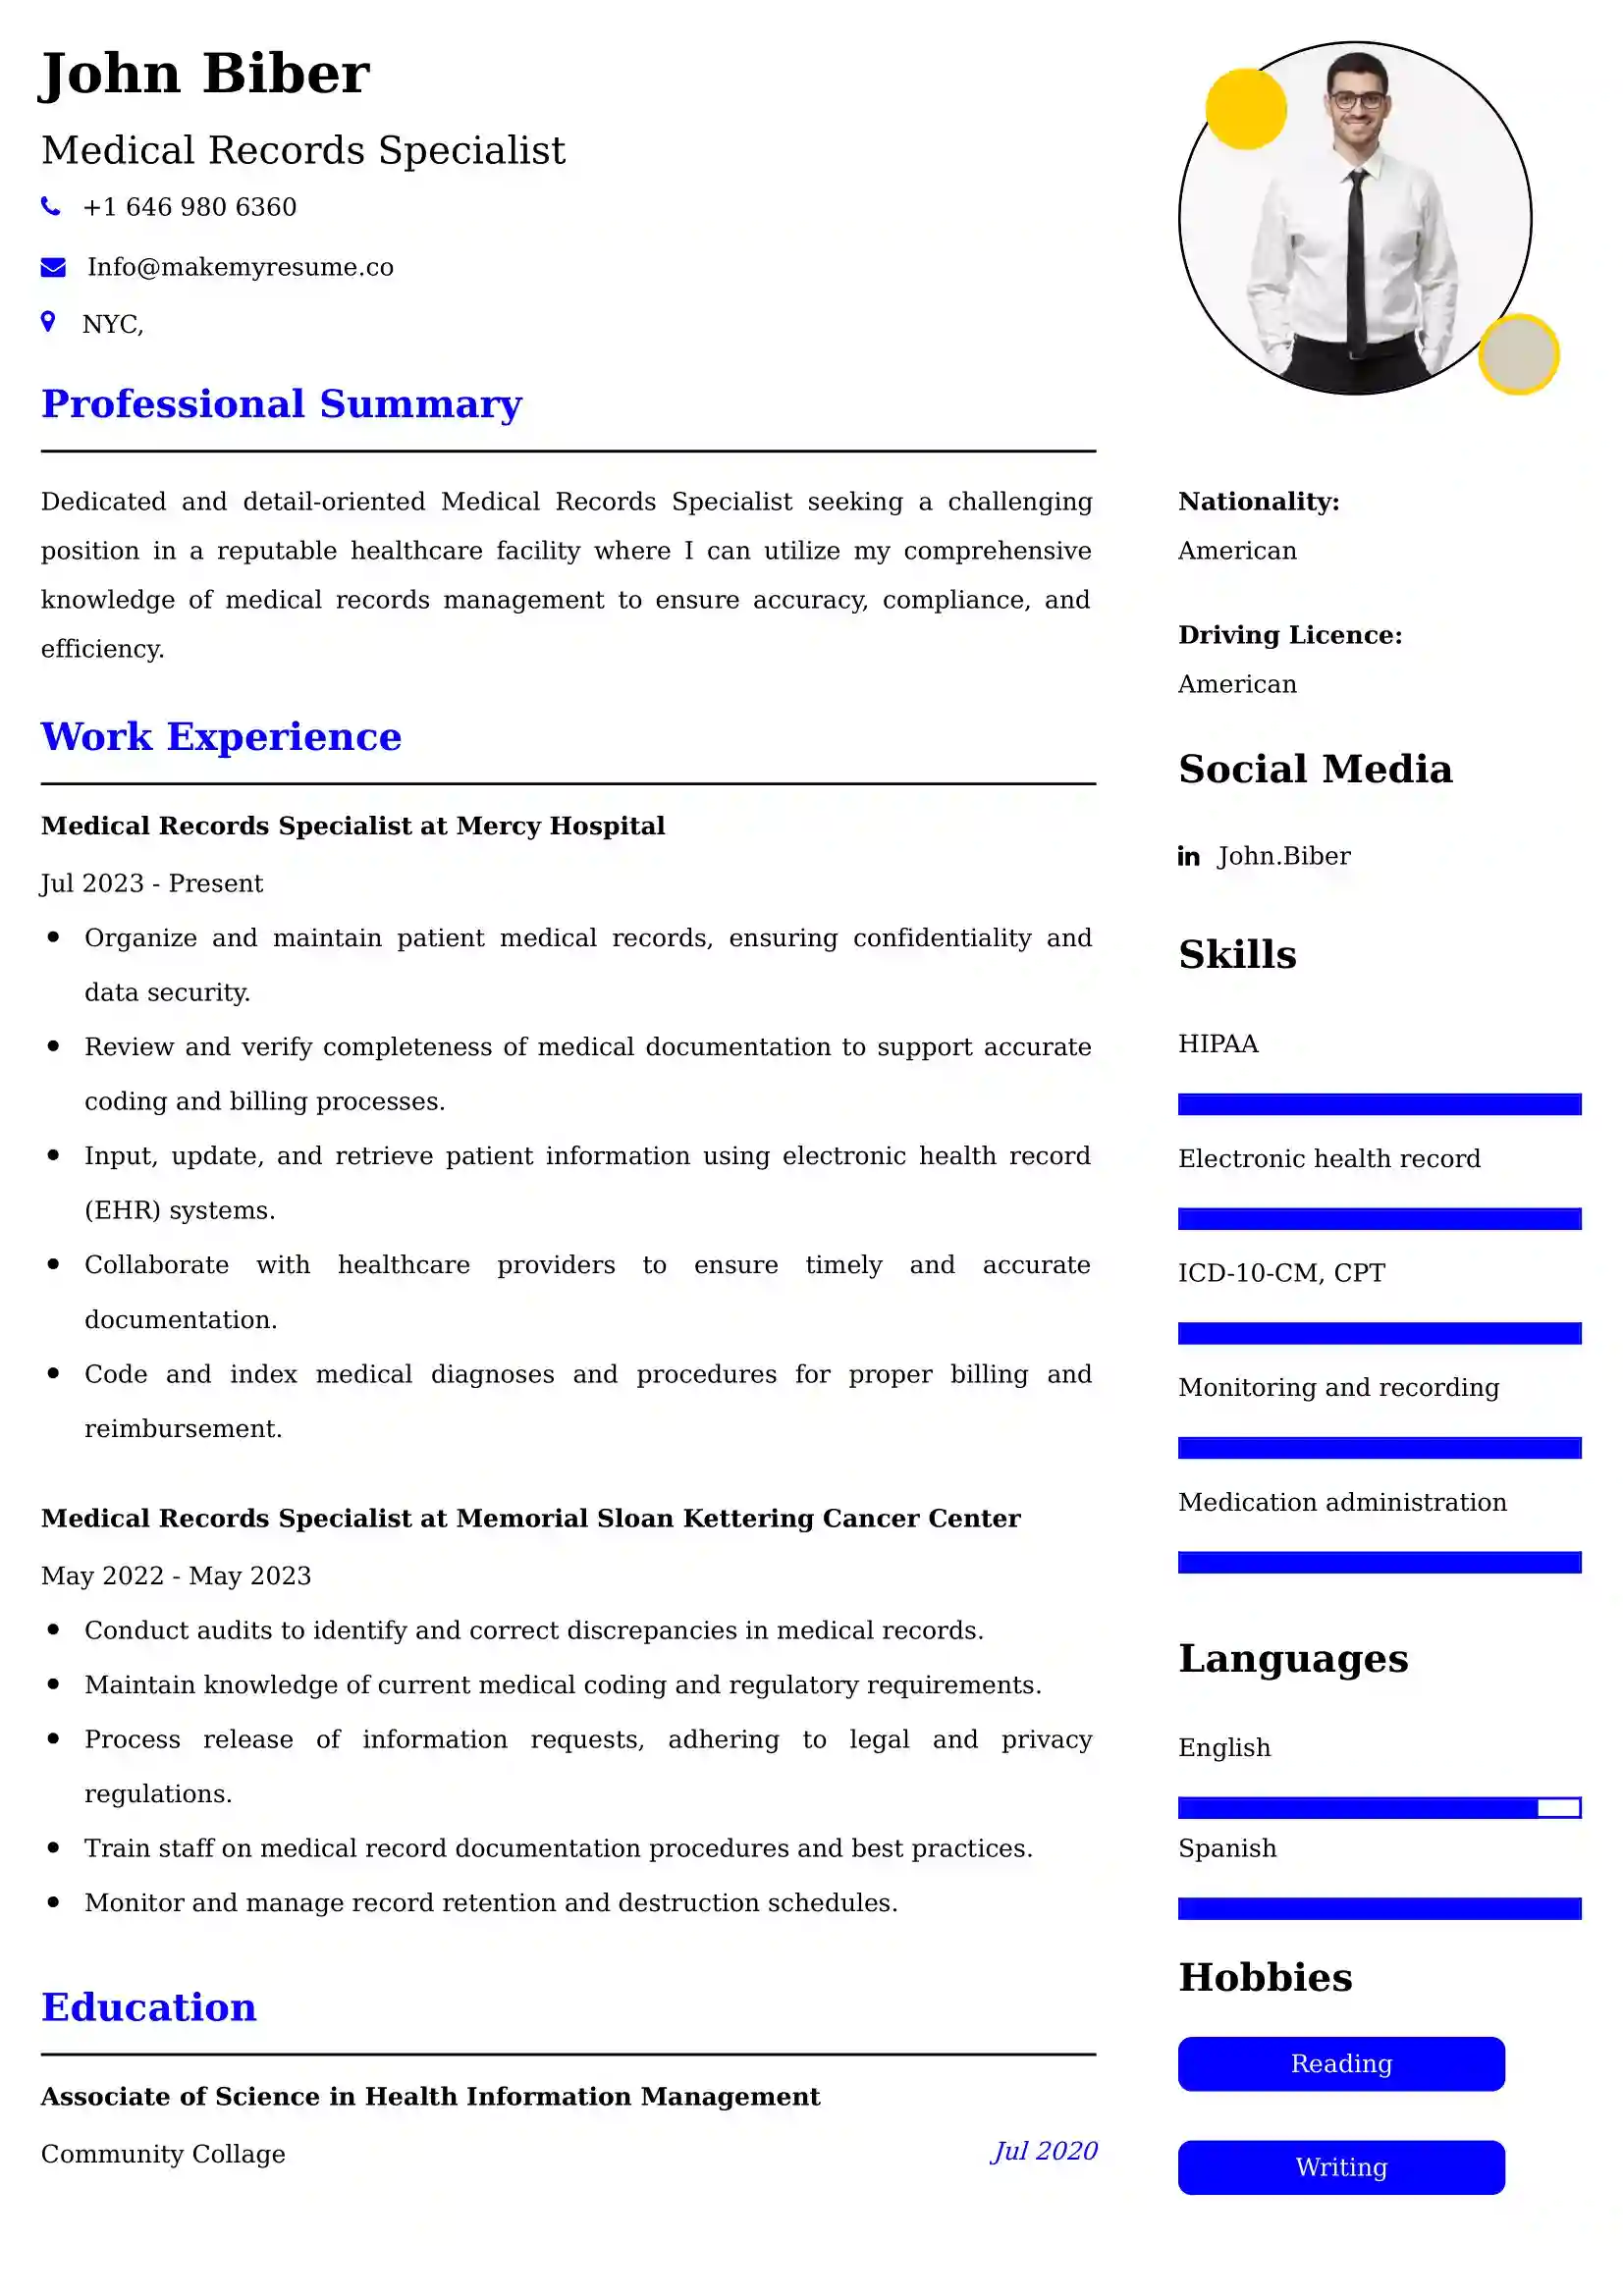 Medical Records Specialist Resume Examples - Brazilian Format, Latest Template